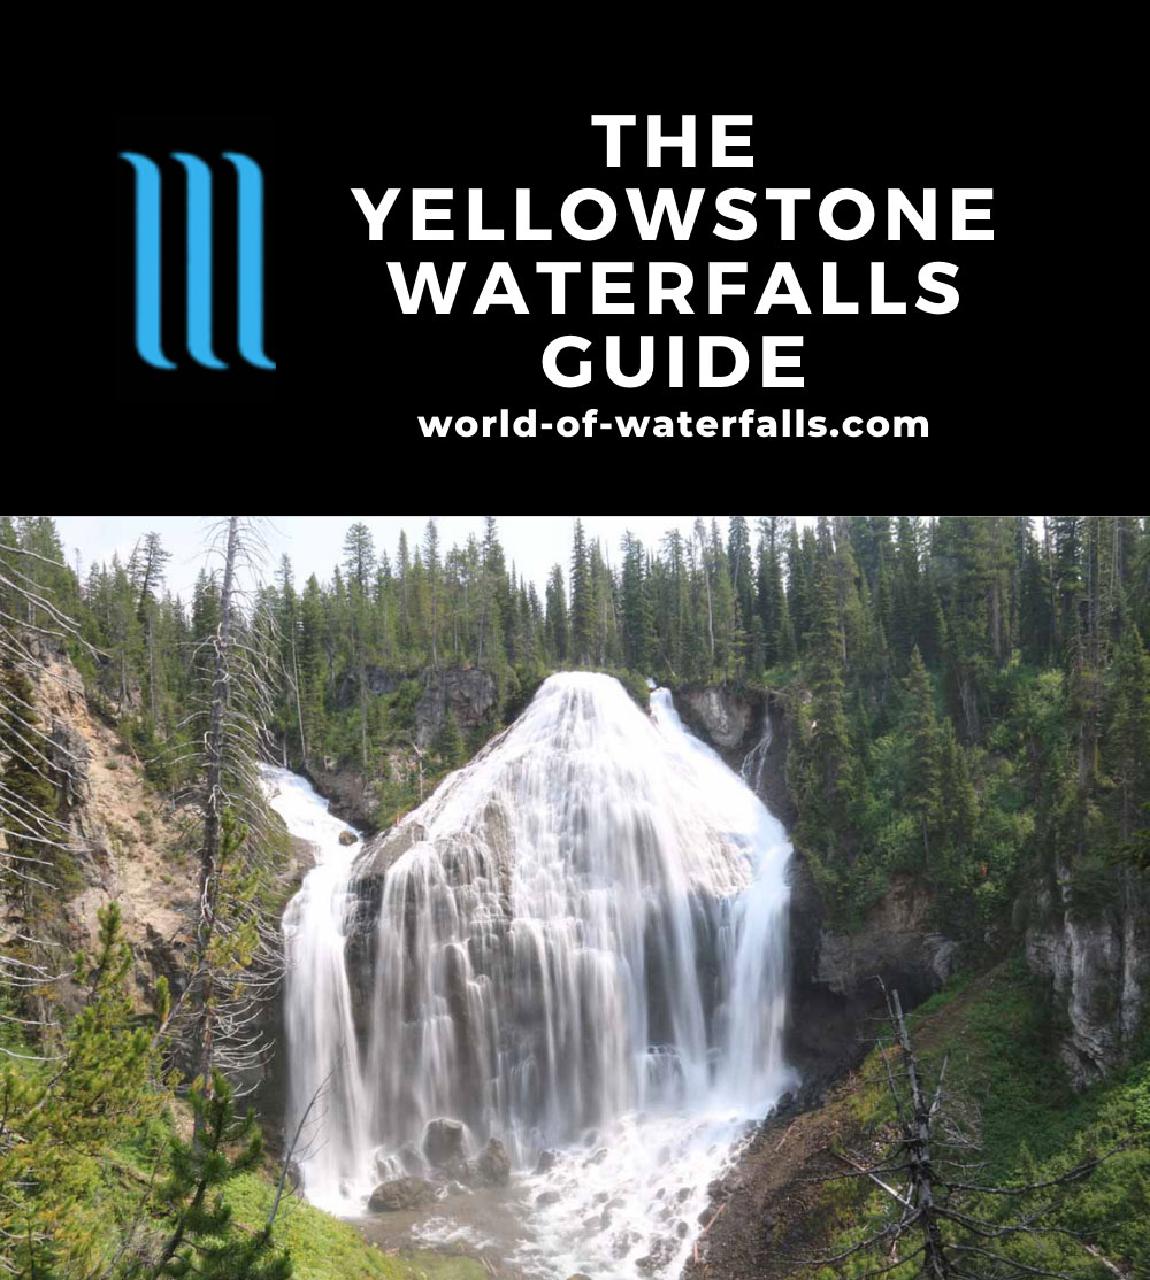 The Complete Yellowstone Waterfalls Guide